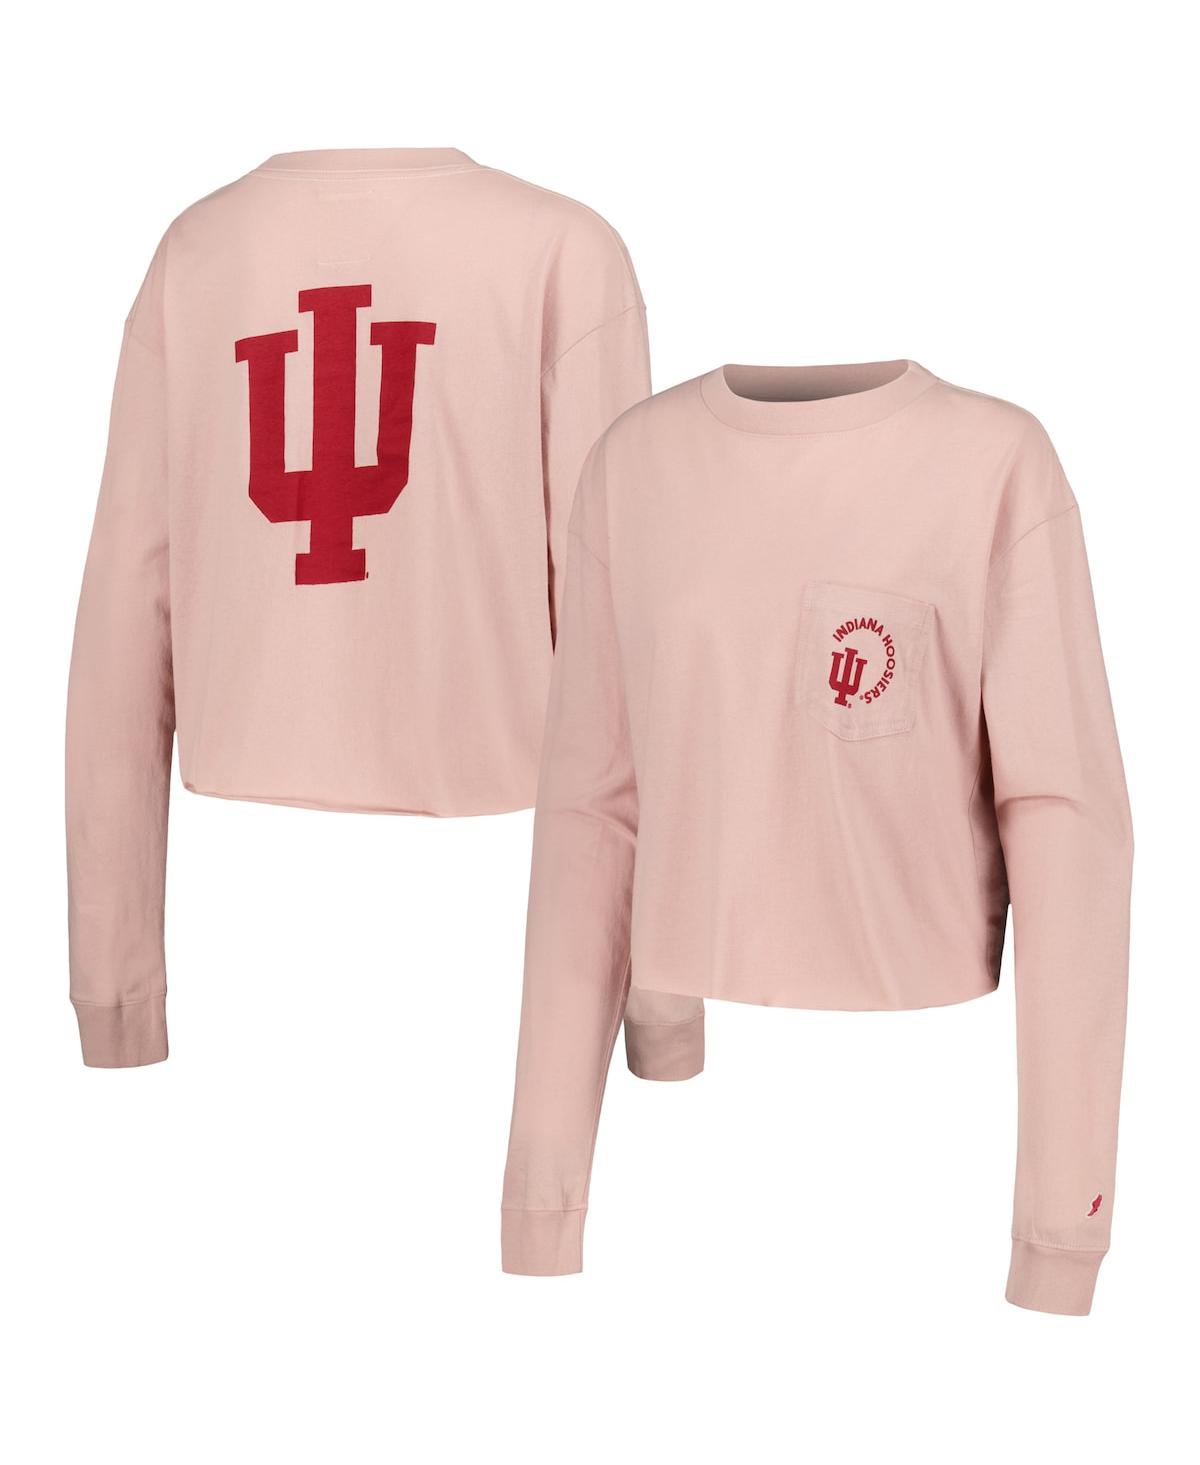 Women's League Collegiate Wear Light Pink Distressed Indiana Hoosiers ClotheslineÂ Midi Long Sleeve Cropped T-shirt - Light Pink